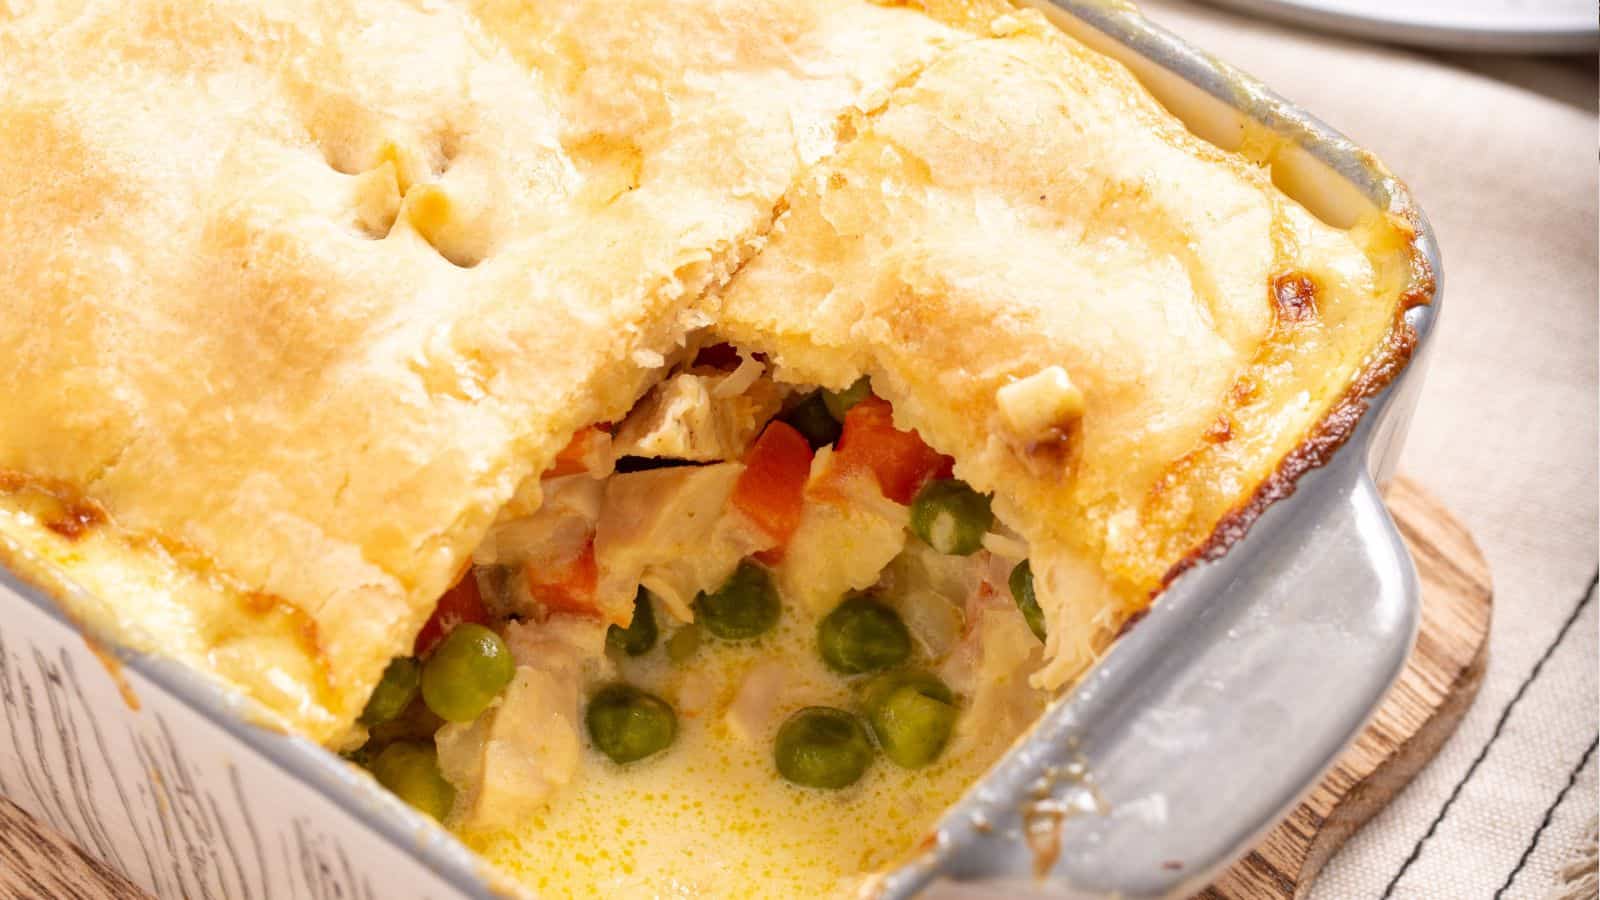 Small serving of chicken pot pie casserole on plate with fork.